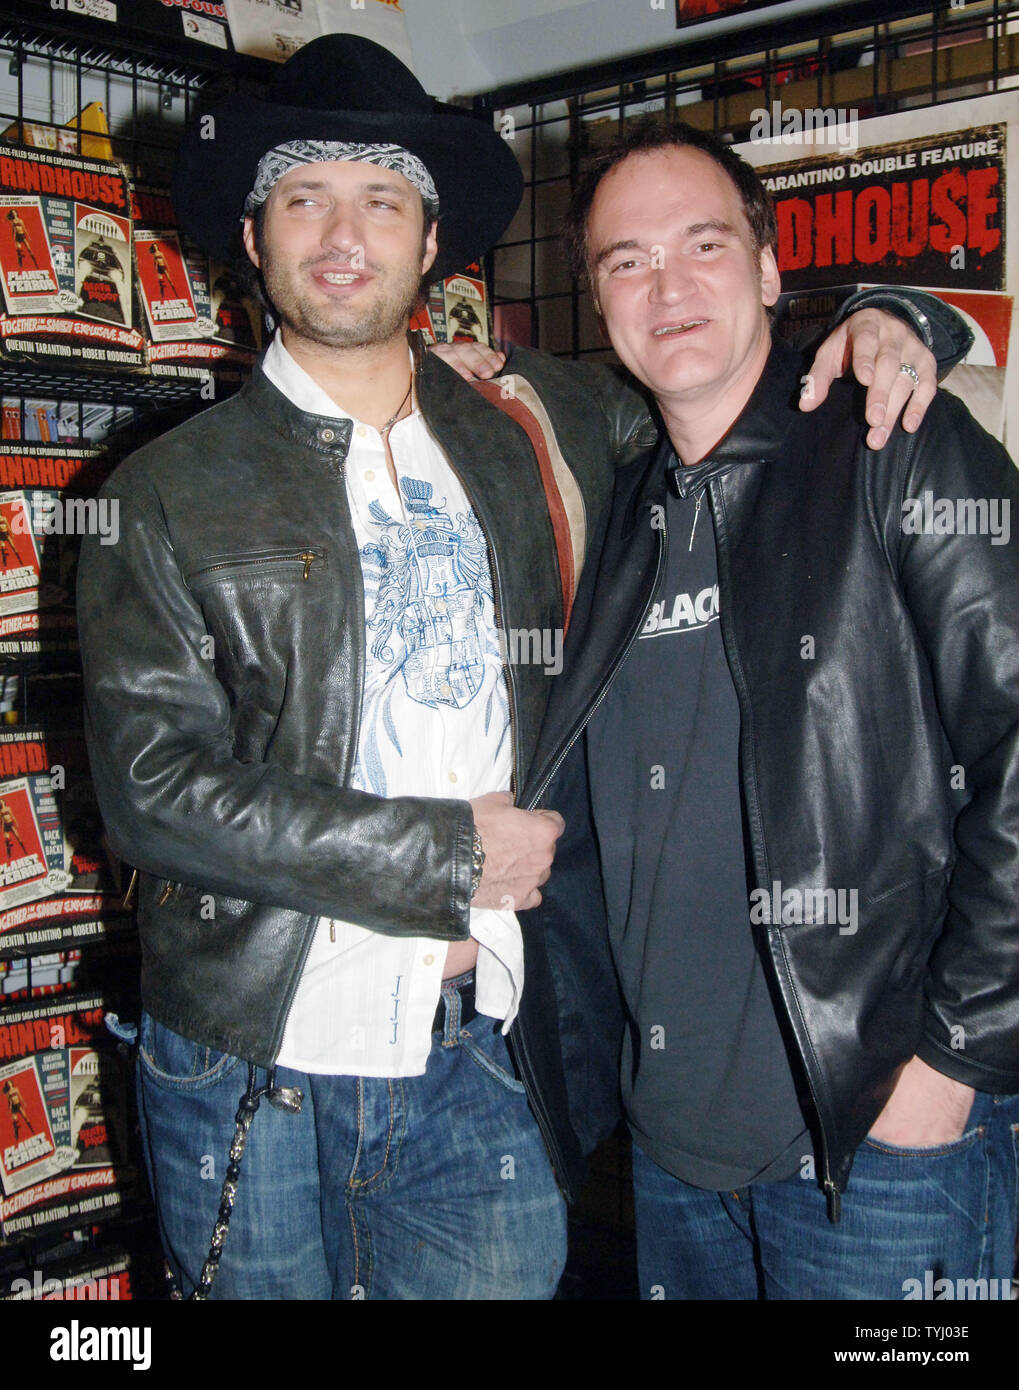 Director Robert Rodriguez (L) and actor-director Quentin Tarantino pose at Hanley's Universe book store while signing copies of their book based on their new film 'GrindHouse' on March 31, 2007 in New York.  (UPI Photo/Ezio Petersen) Stock Photo